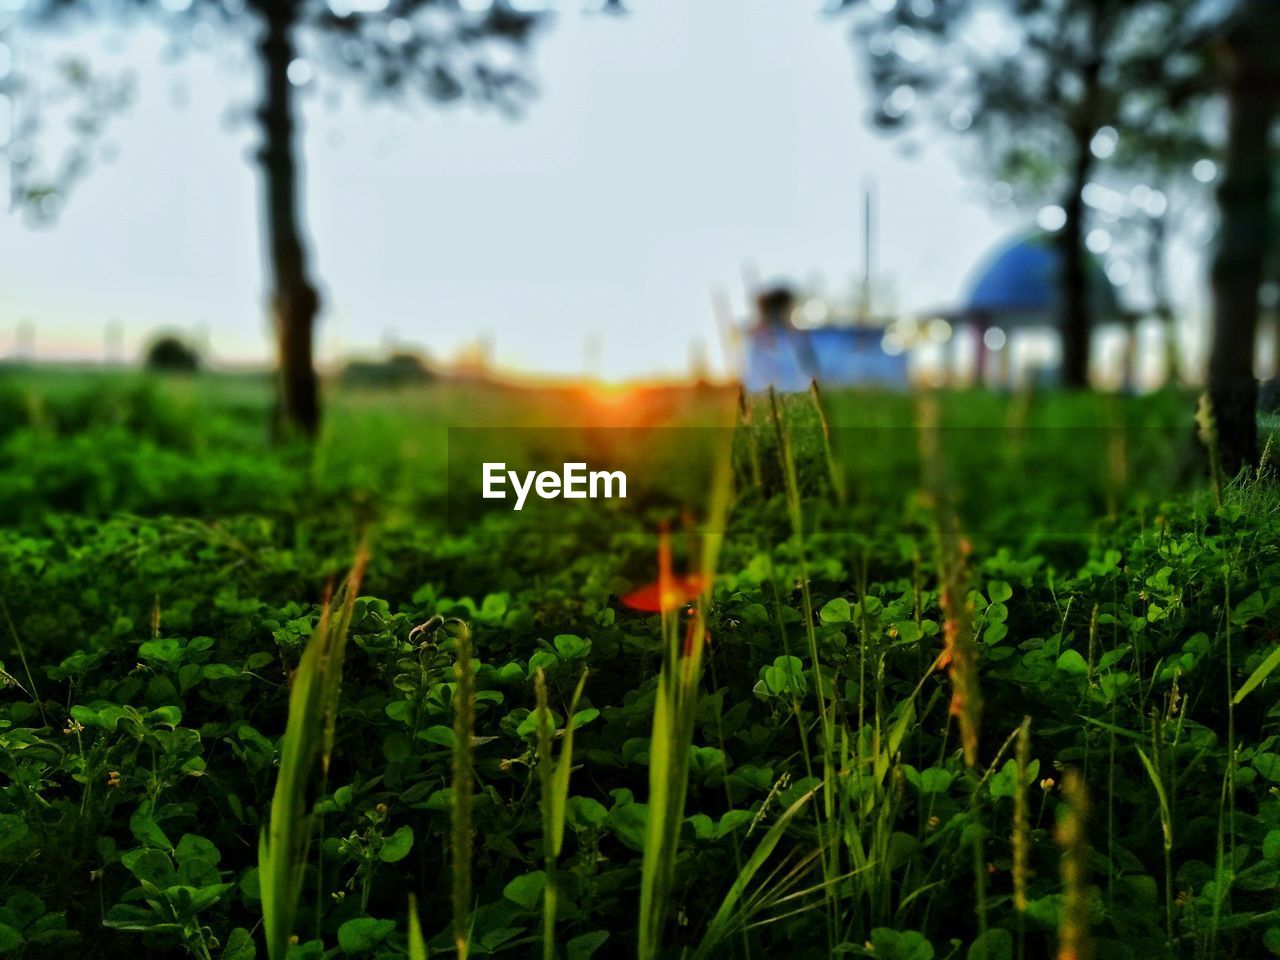 green, plant, nature, grass, leaf, sunlight, growth, land, field, flower, tree, rural area, environment, sky, landscape, forest, beauty in nature, no people, agriculture, focus on foreground, lawn, rural scene, day, outdoors, natural environment, selective focus, meadow, tranquility, woodland, morning, soil, freshness, food, vegetable, plantation, crop, food and drink, scenics - nature, autumn, farm, environmental conservation, close-up